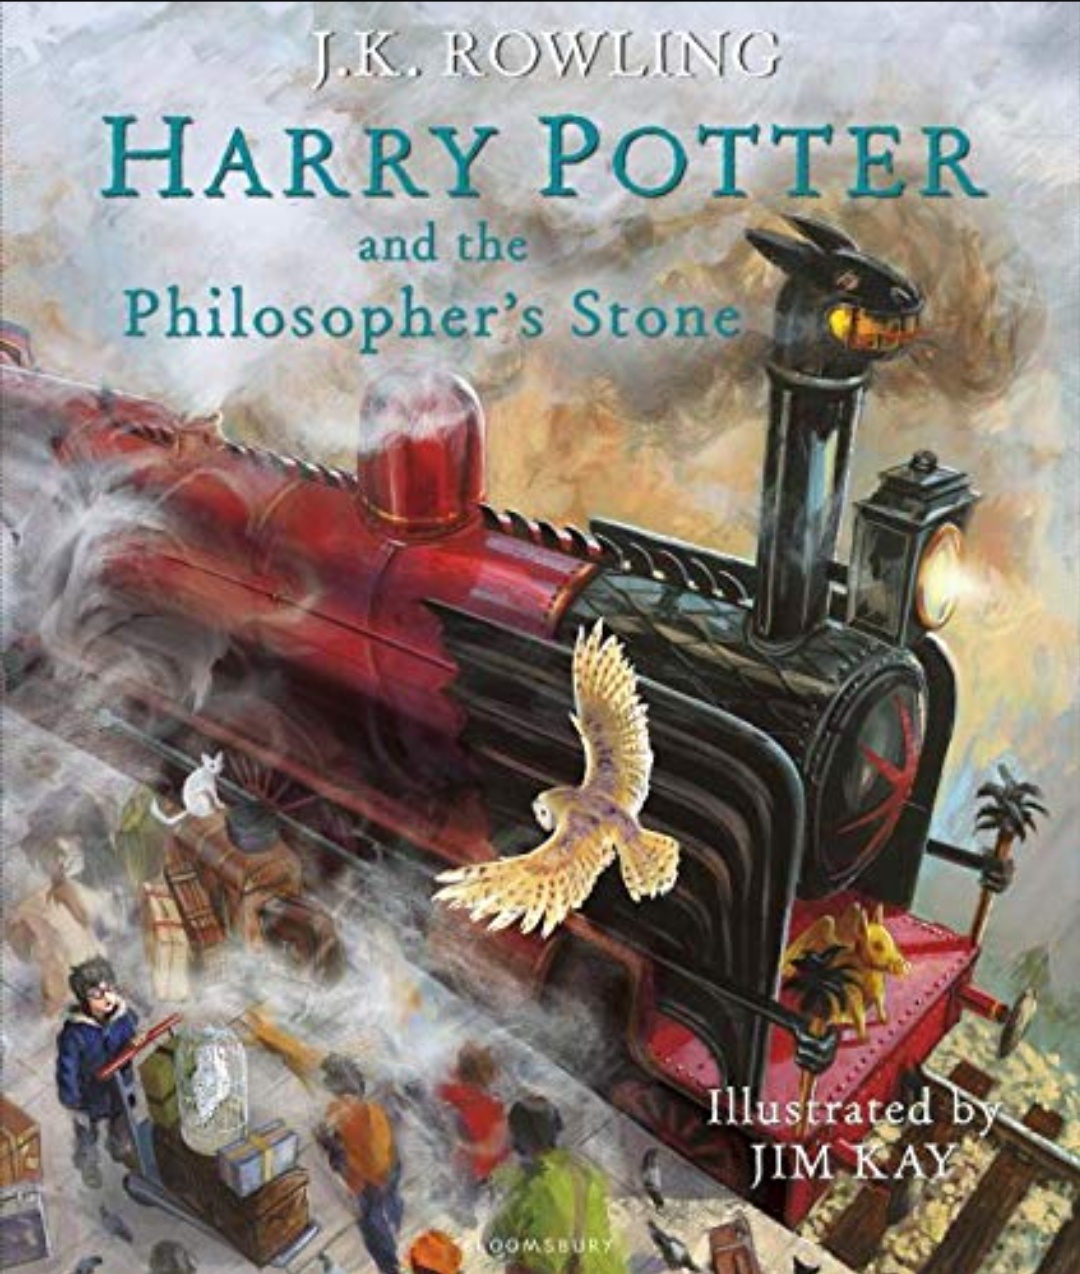 J. K. Rowling, Jim Kay (Illustrations): Harry Potter and the Philosopher's Stone (Hardcover, Bloomsbury)